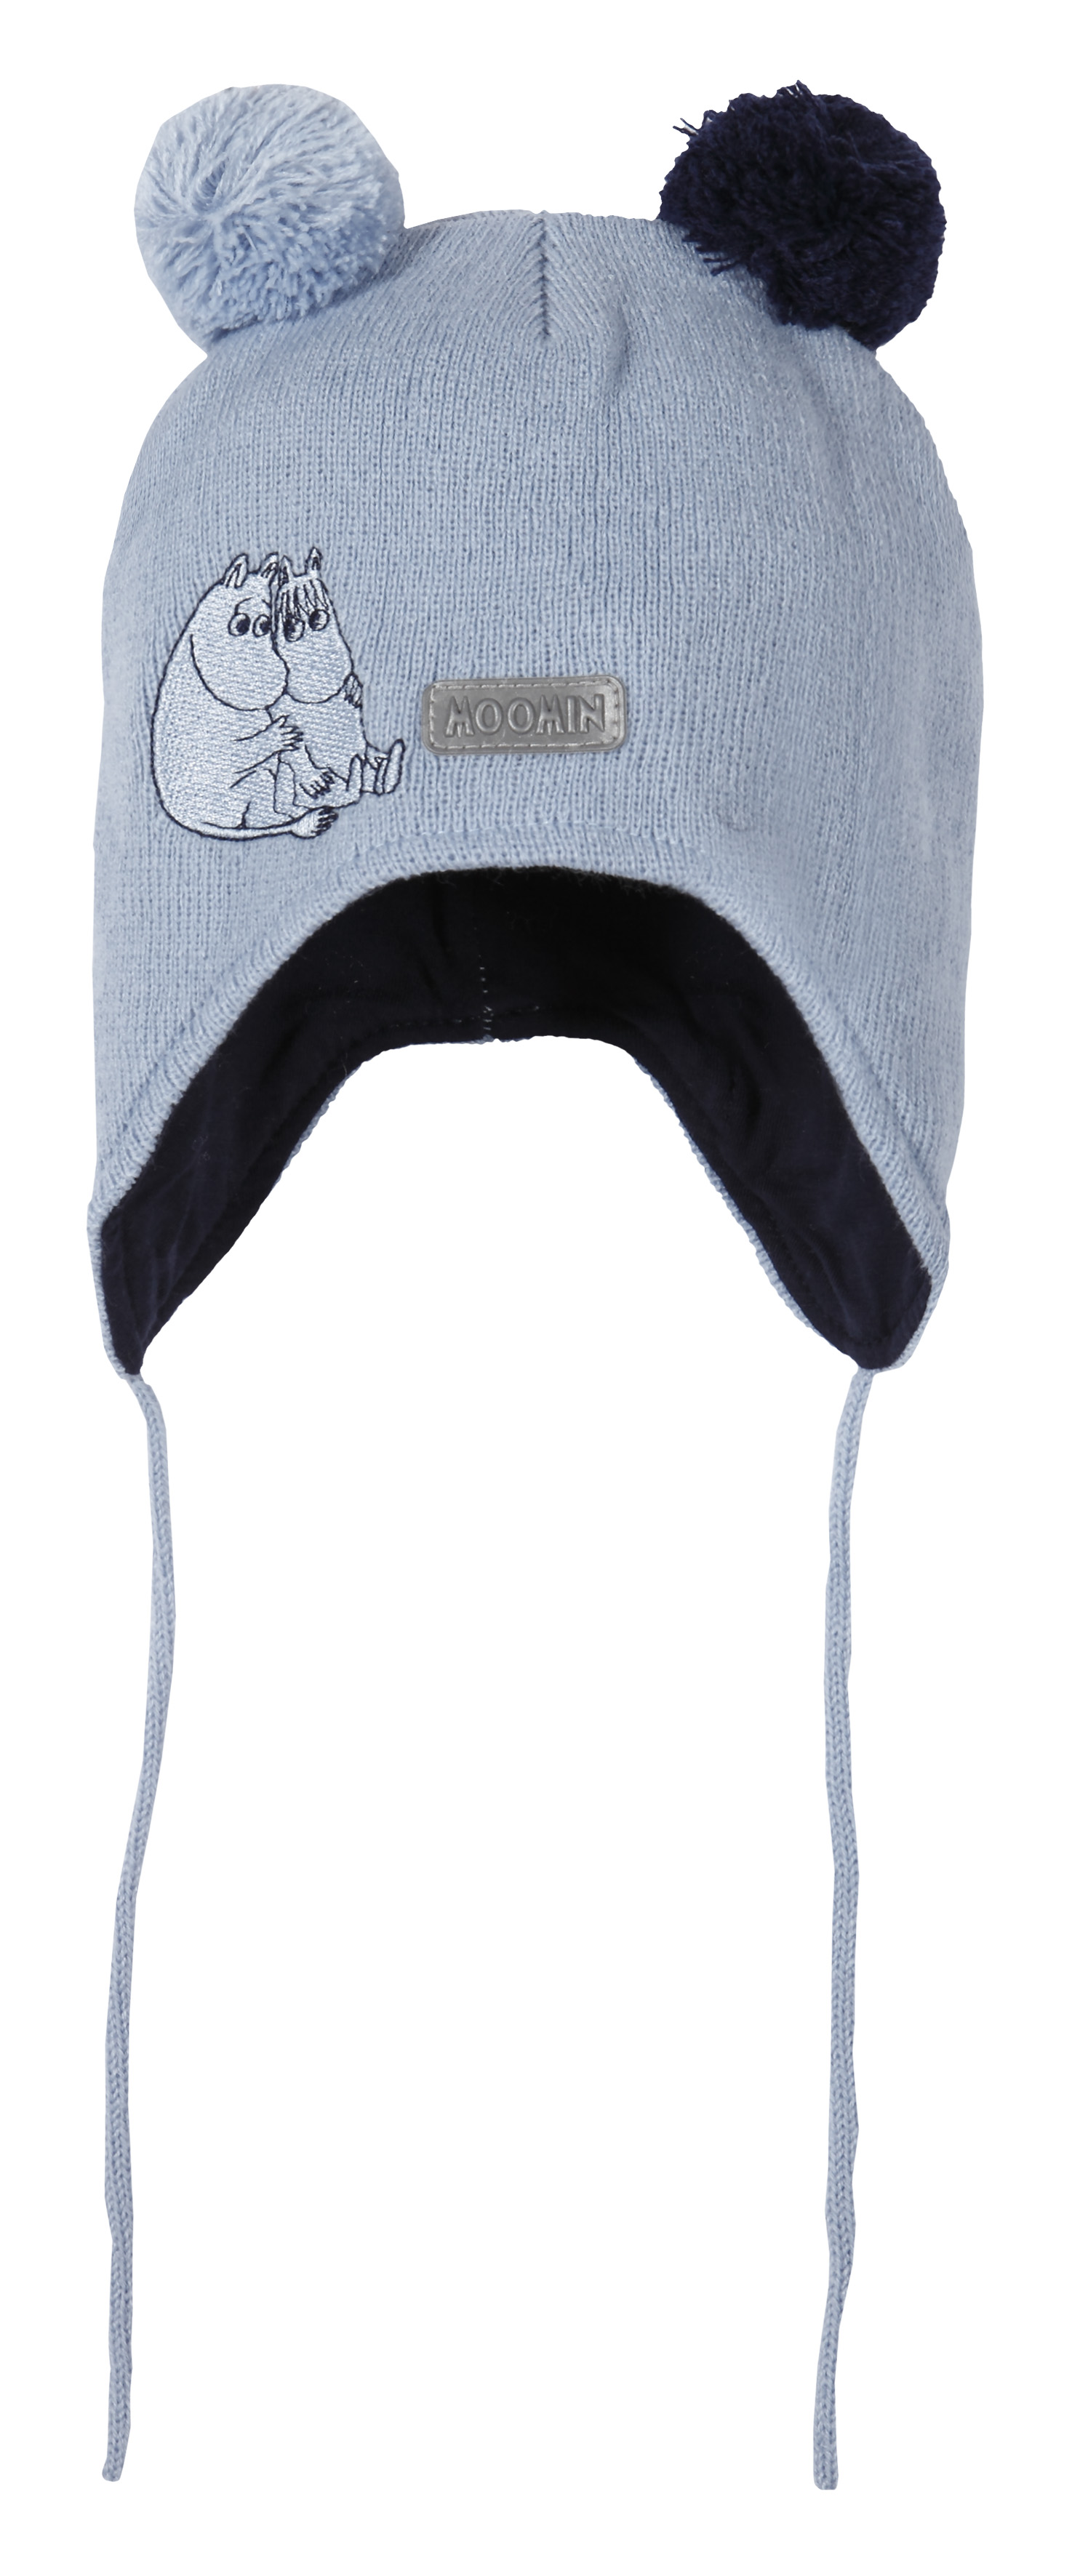 L-Fashion Group Oy - Babies knitted hat - boys